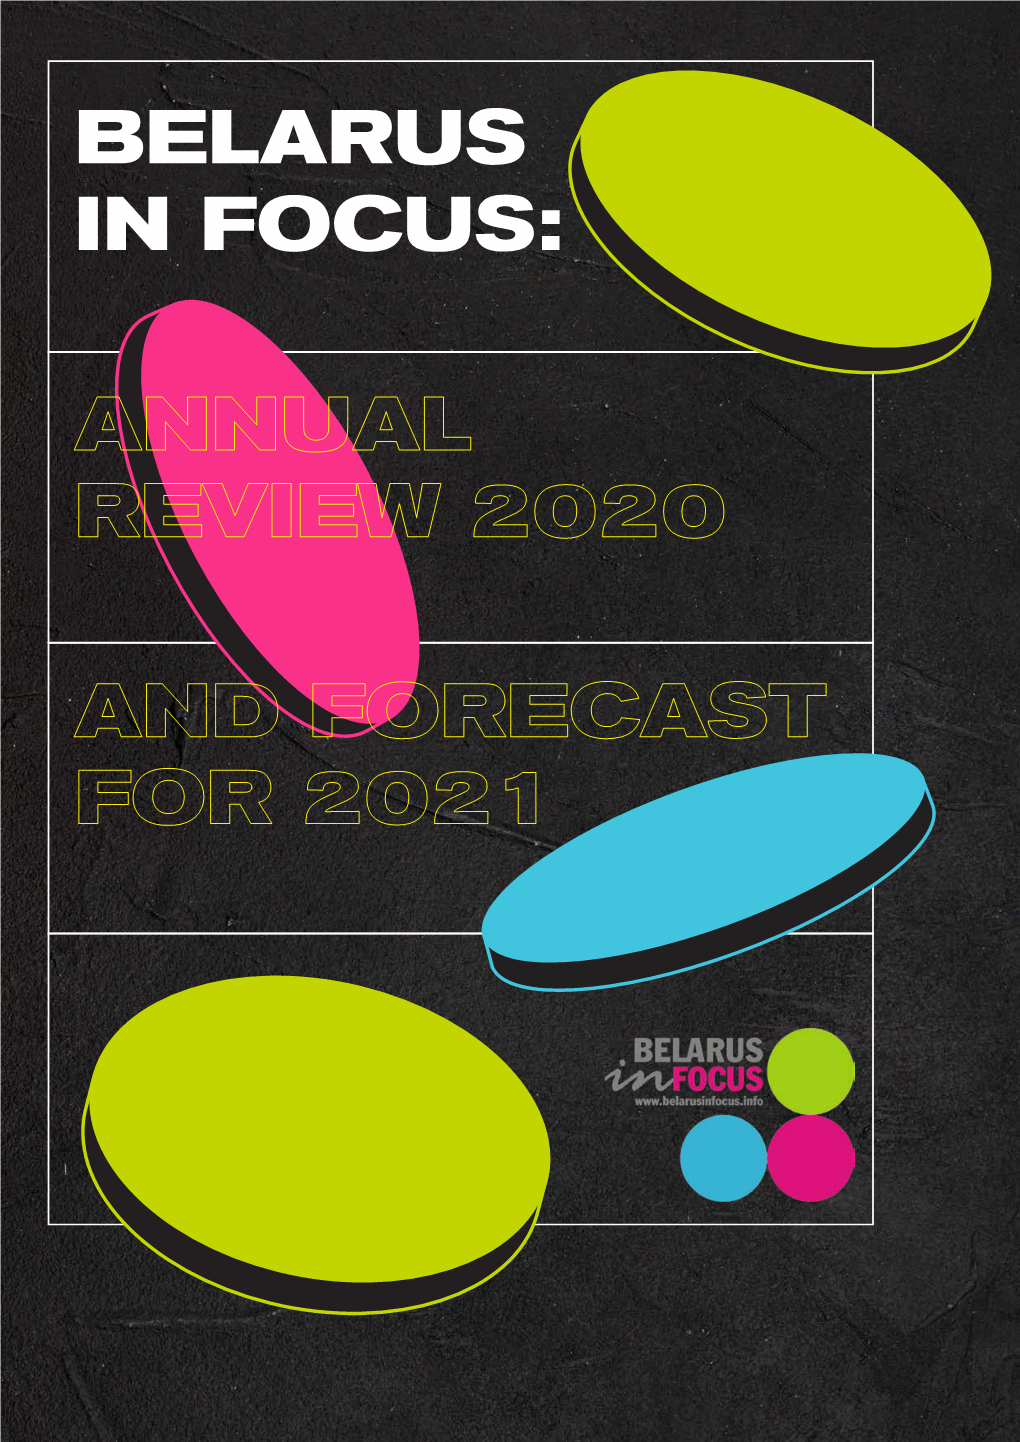 Annual Review 2020 and Forecast for 2021 Contents